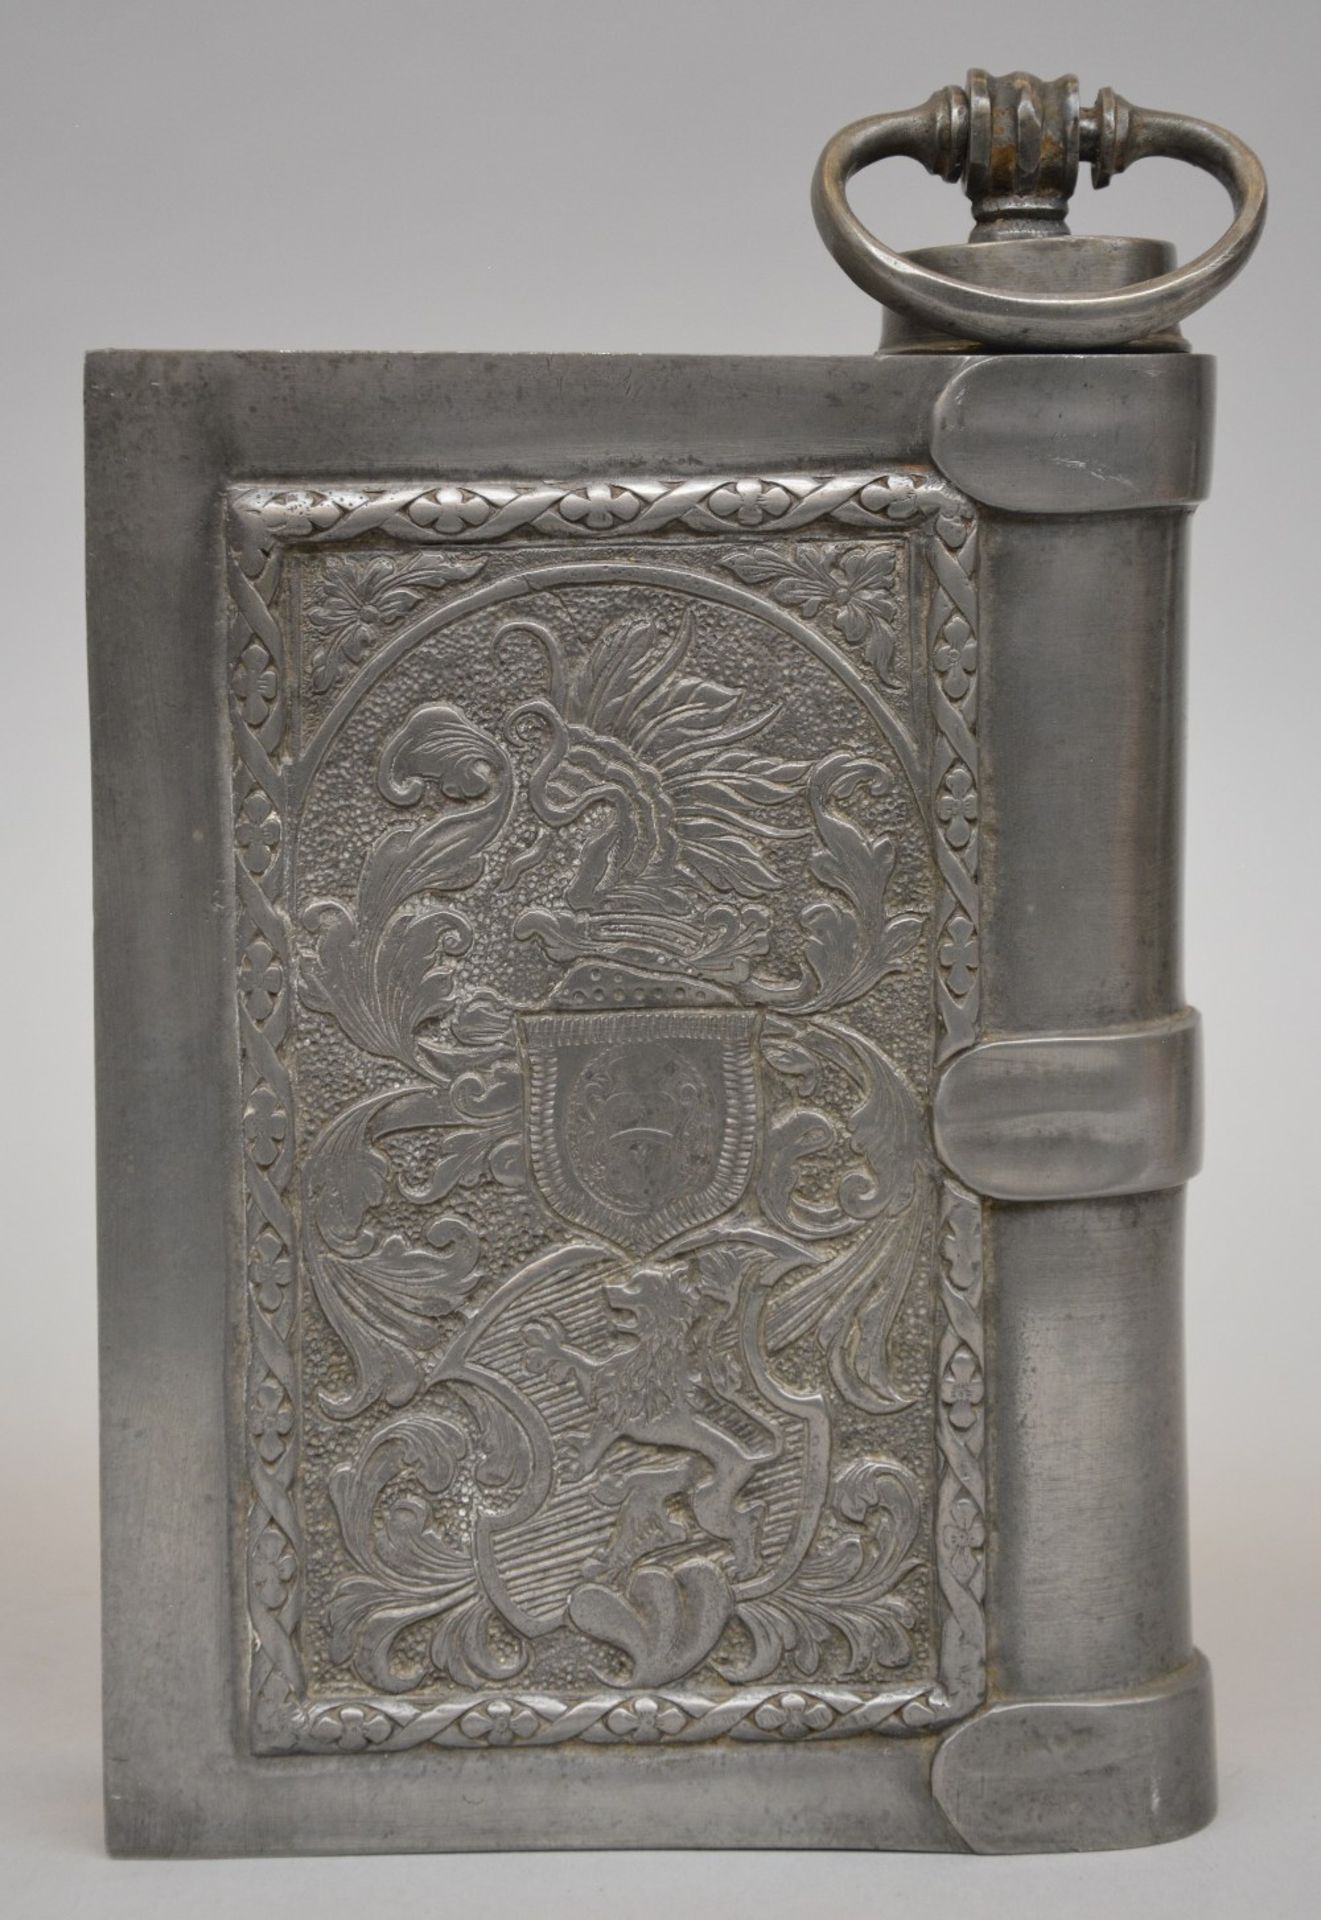 A 19thC French pewter feet warmer and a ditto food recipient, H 6 - W 26 - D 15cm / H 23 - - Bild 3 aus 9